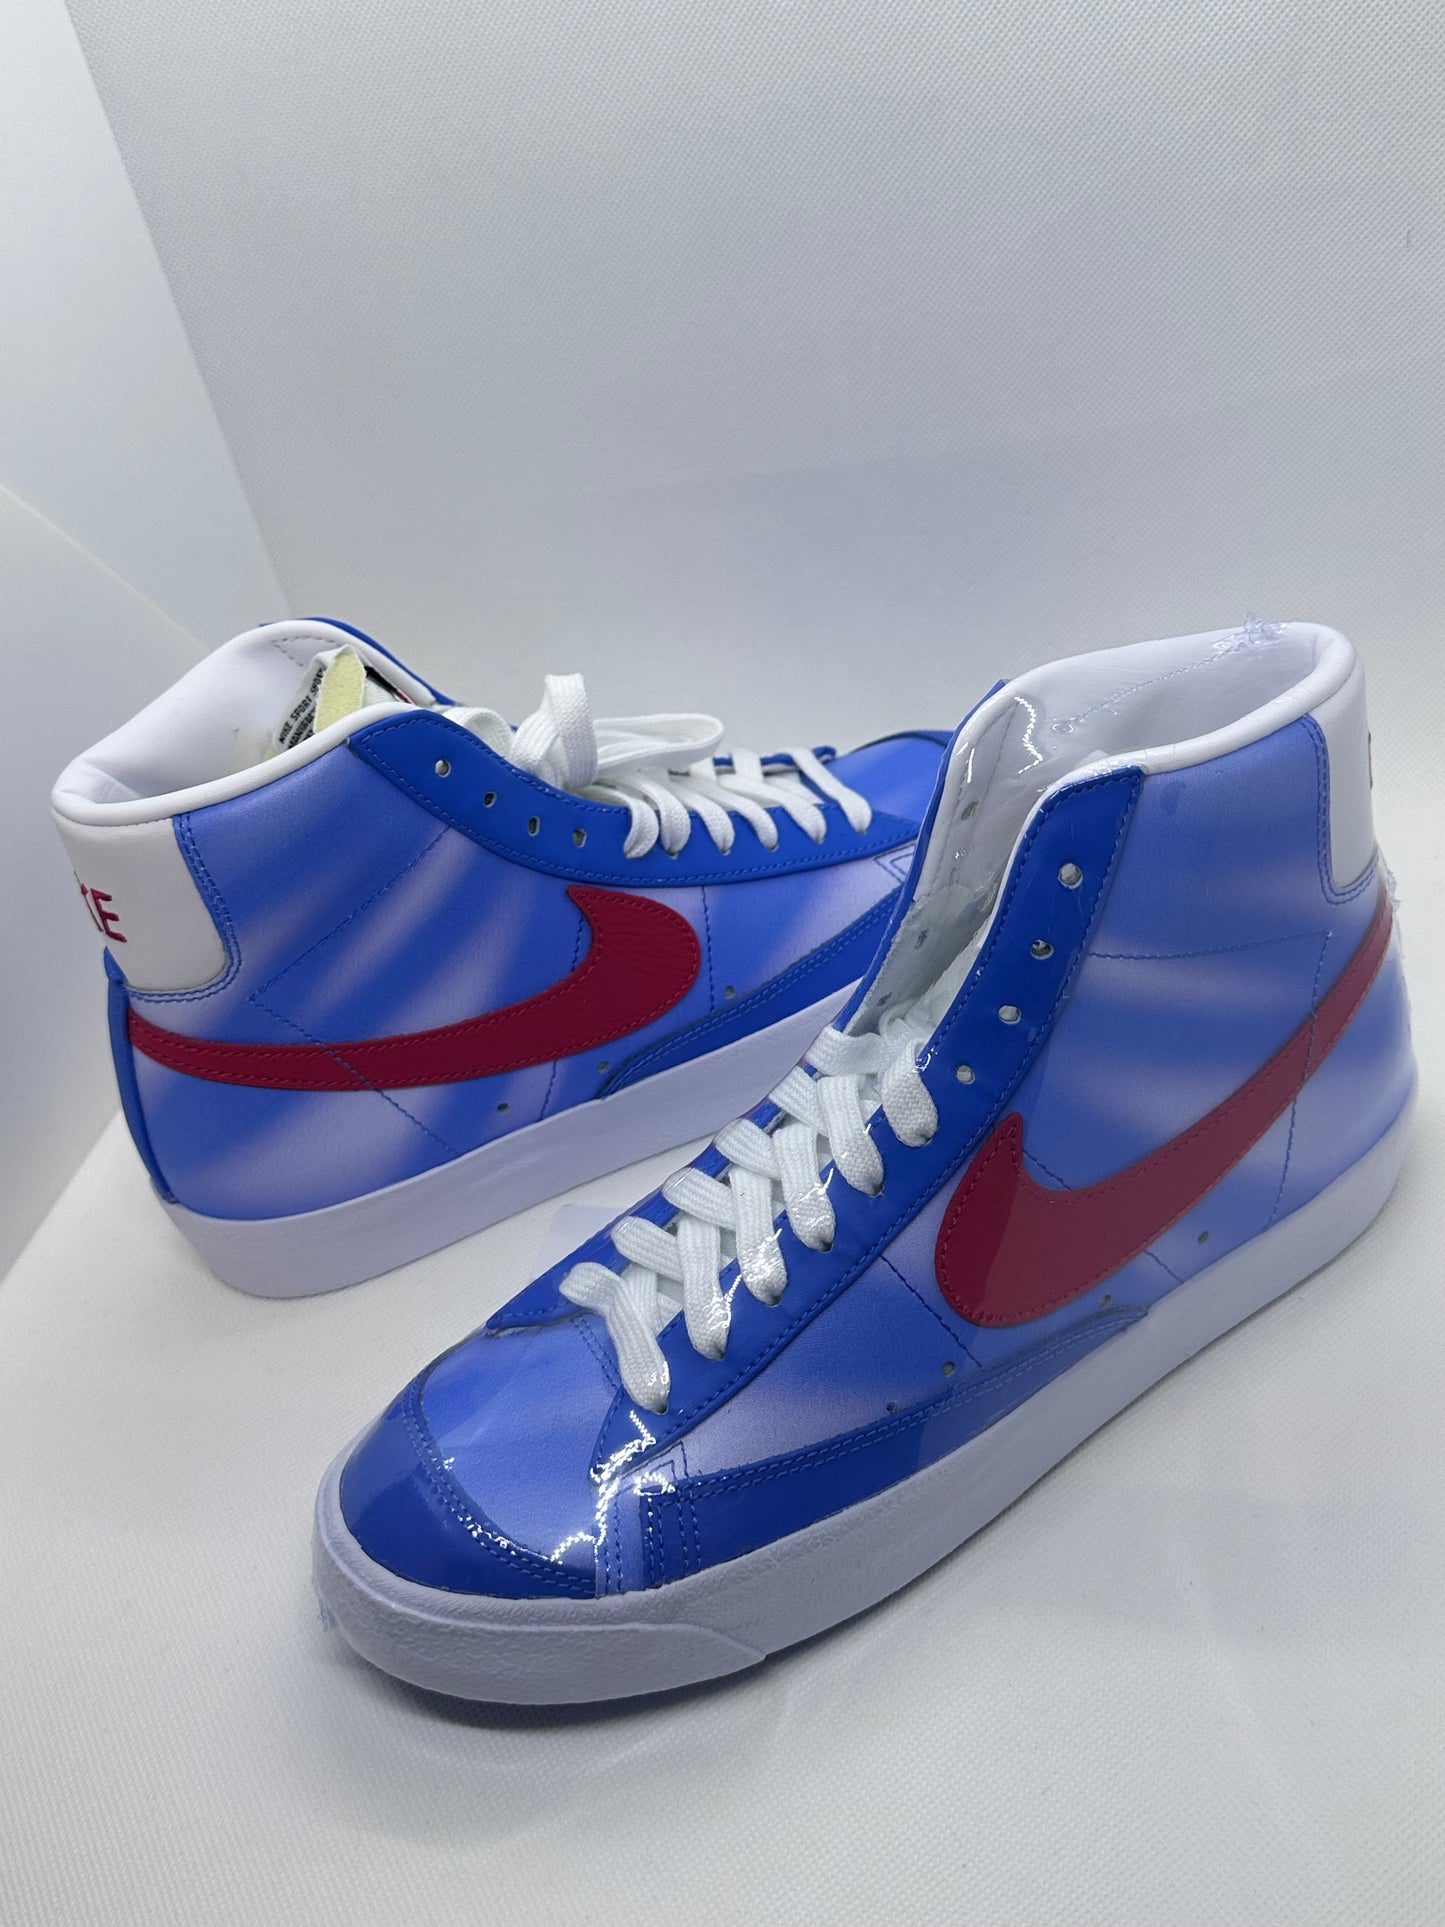 Nike Blazer Mid 77 Pacific Blue Red